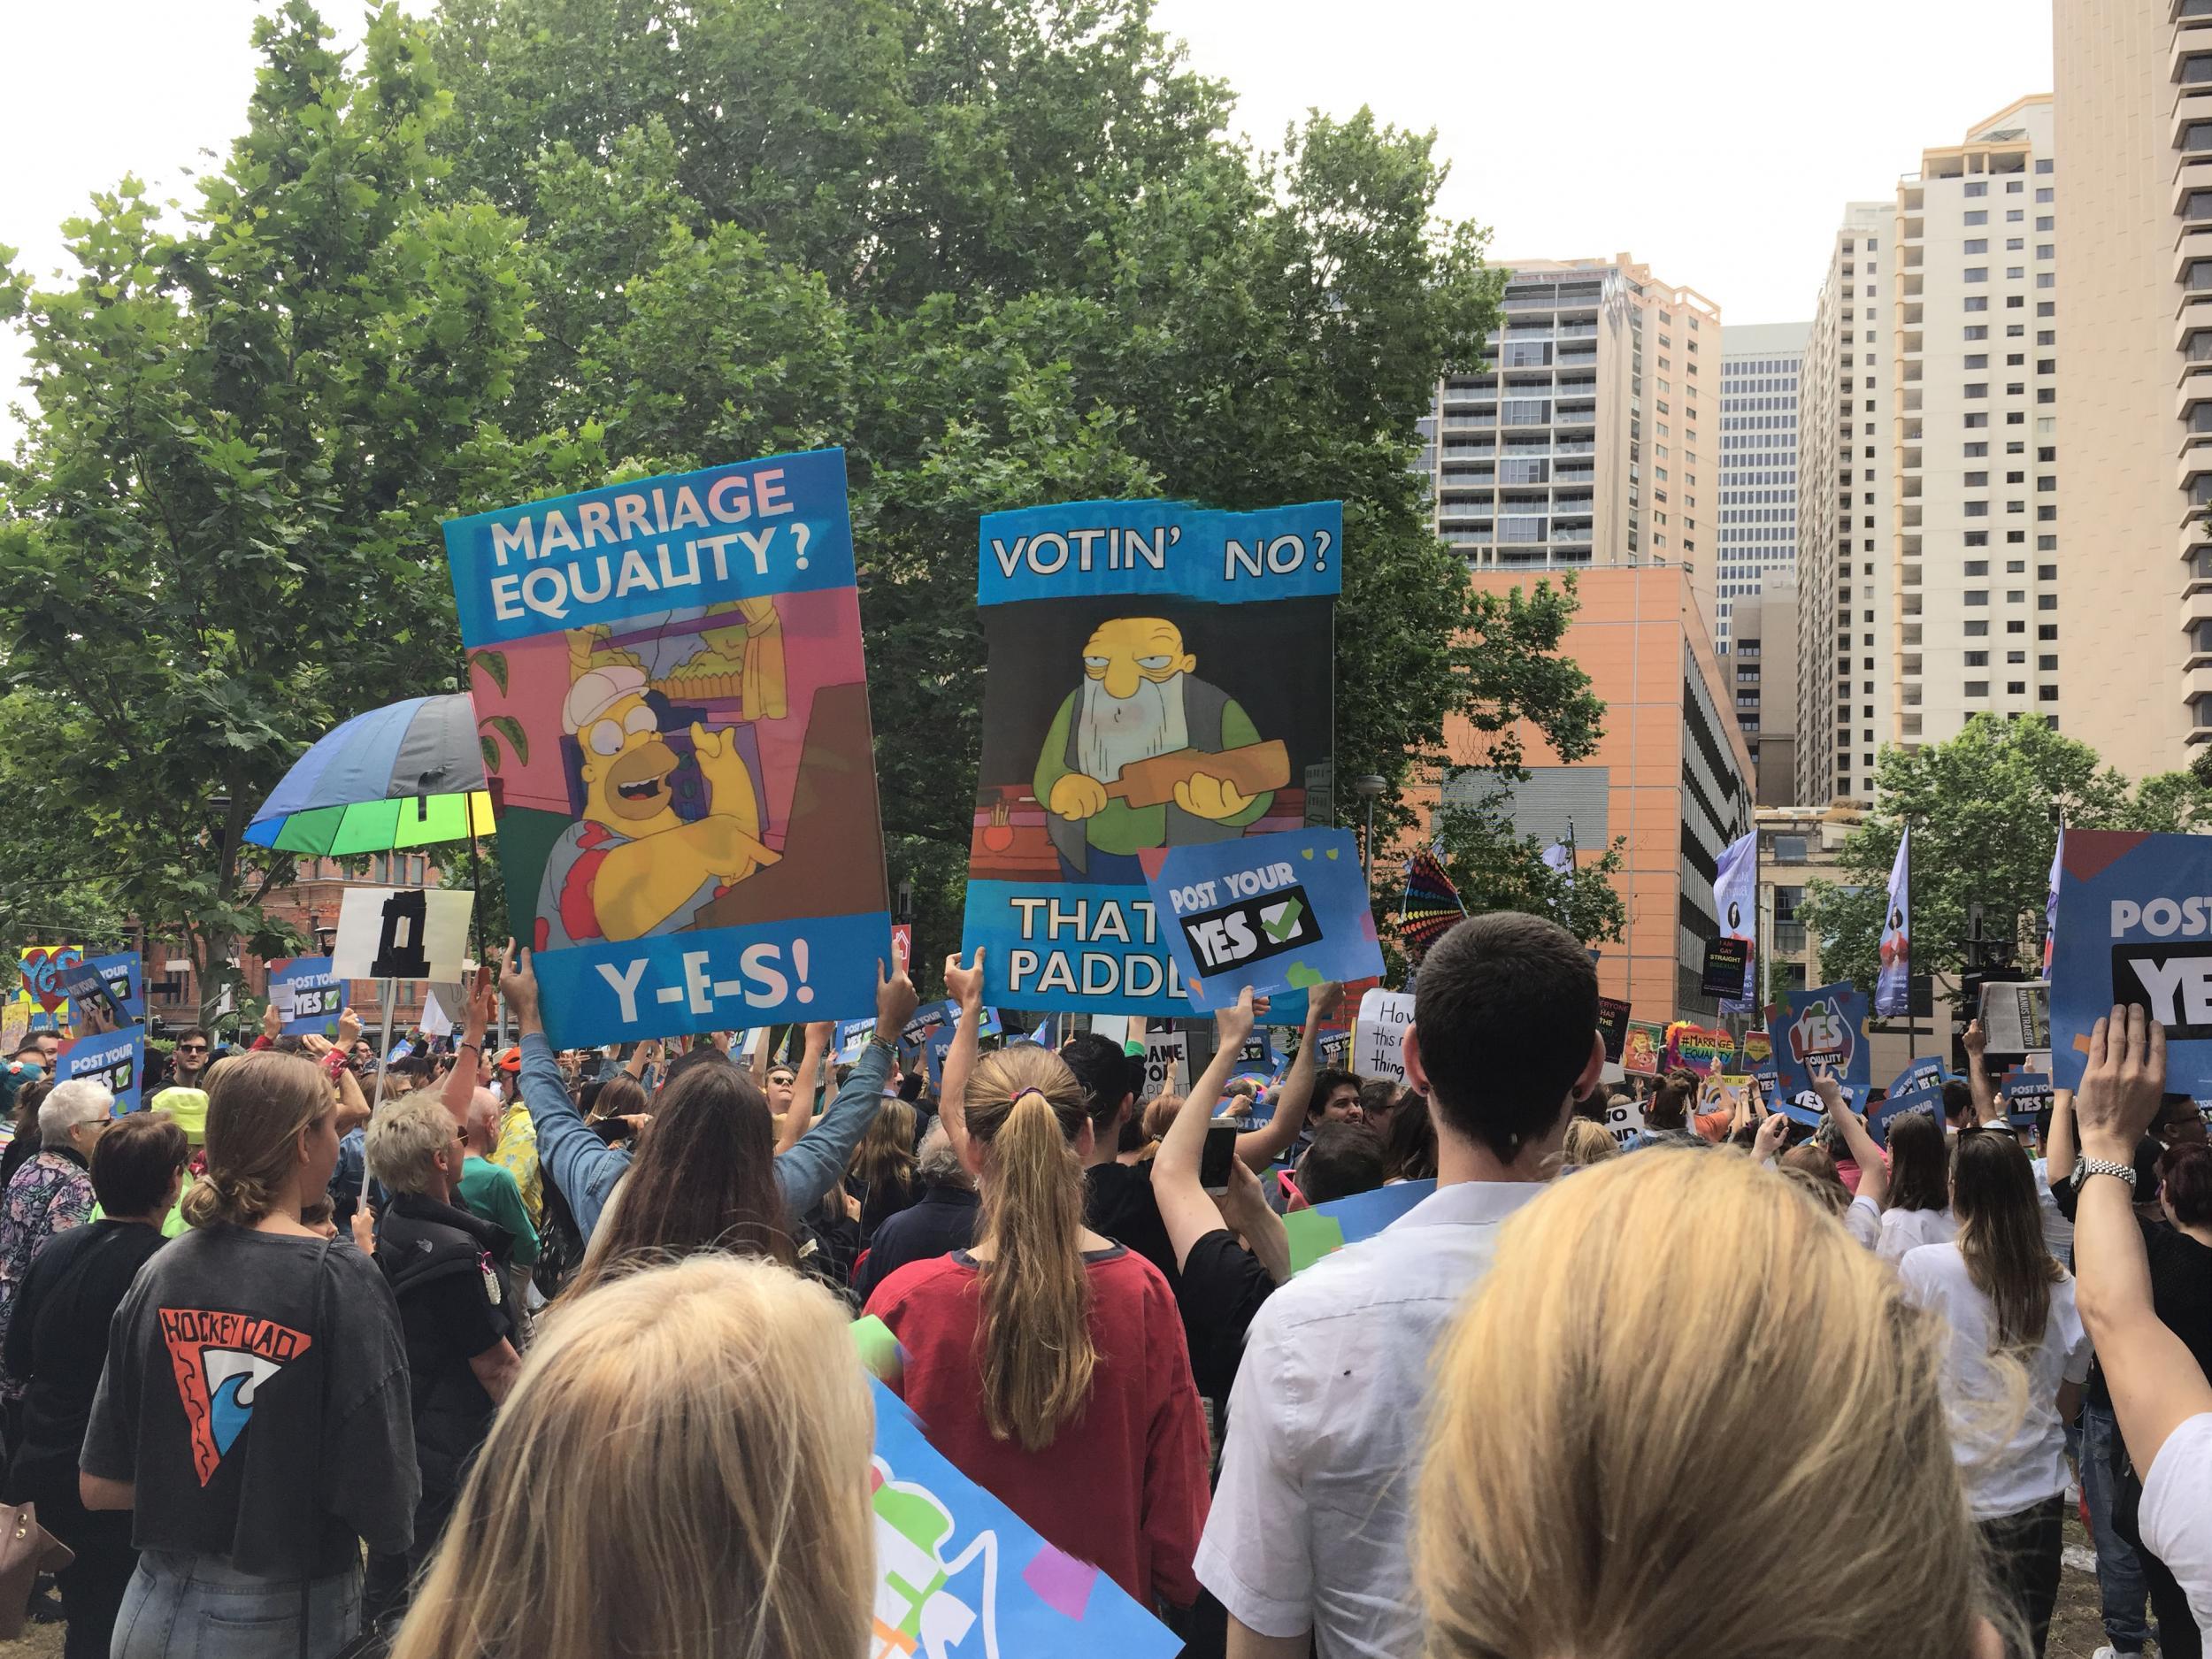 Sydney's LGBT community have been protesting ahead of the results on Wednesday